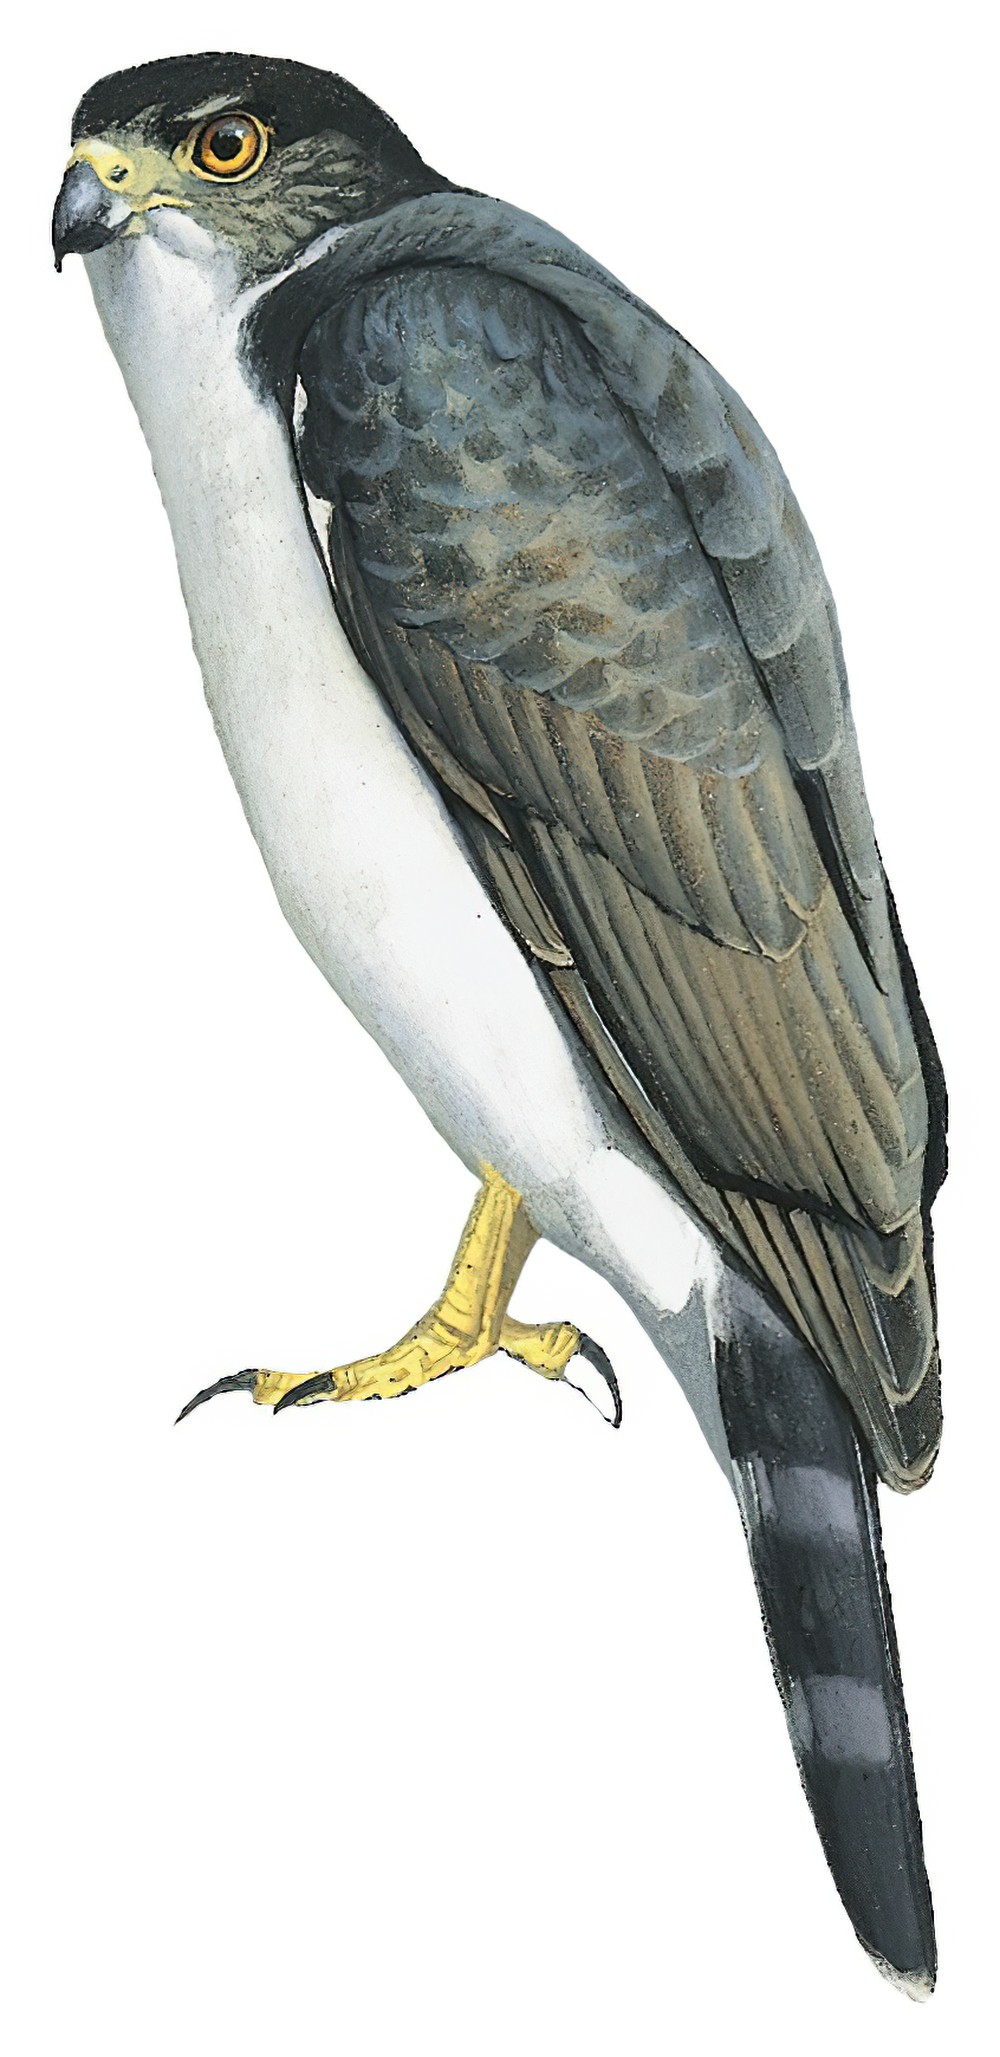 Gray-bellied Hawk / Accipiter poliogaster